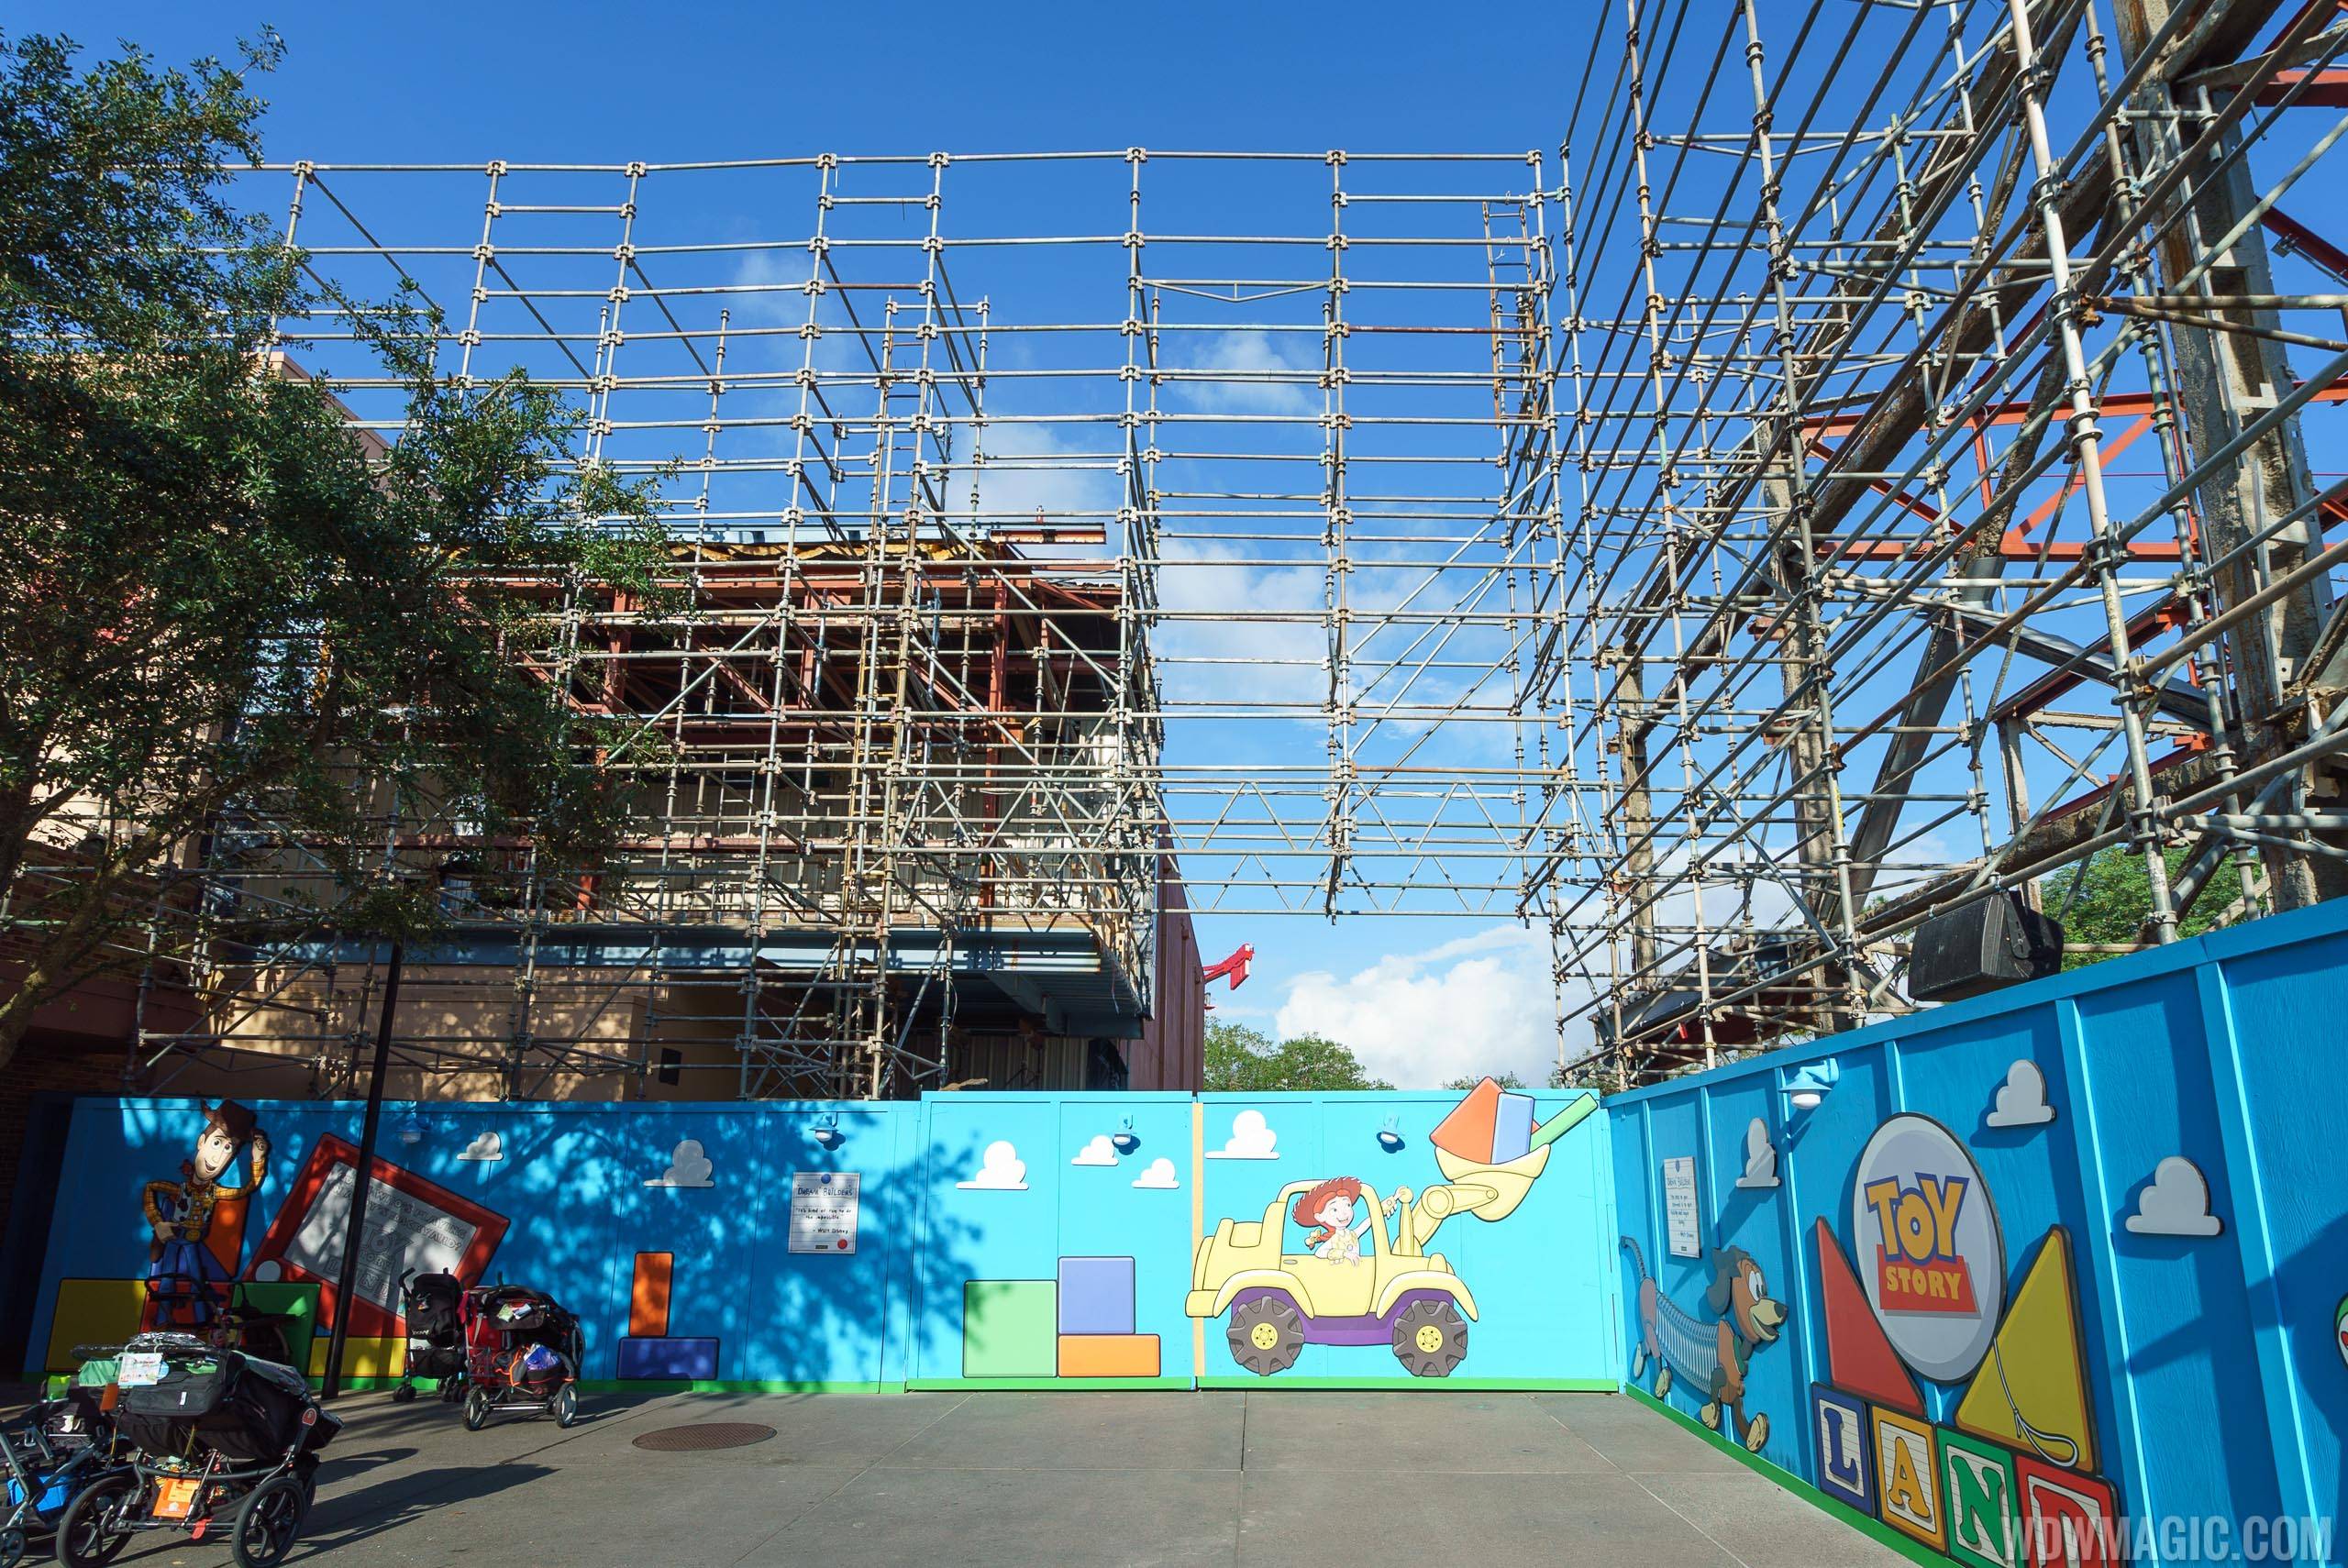 PHOTOS - Demolition of Soundstage 4 at the new Toy Story Land entrance